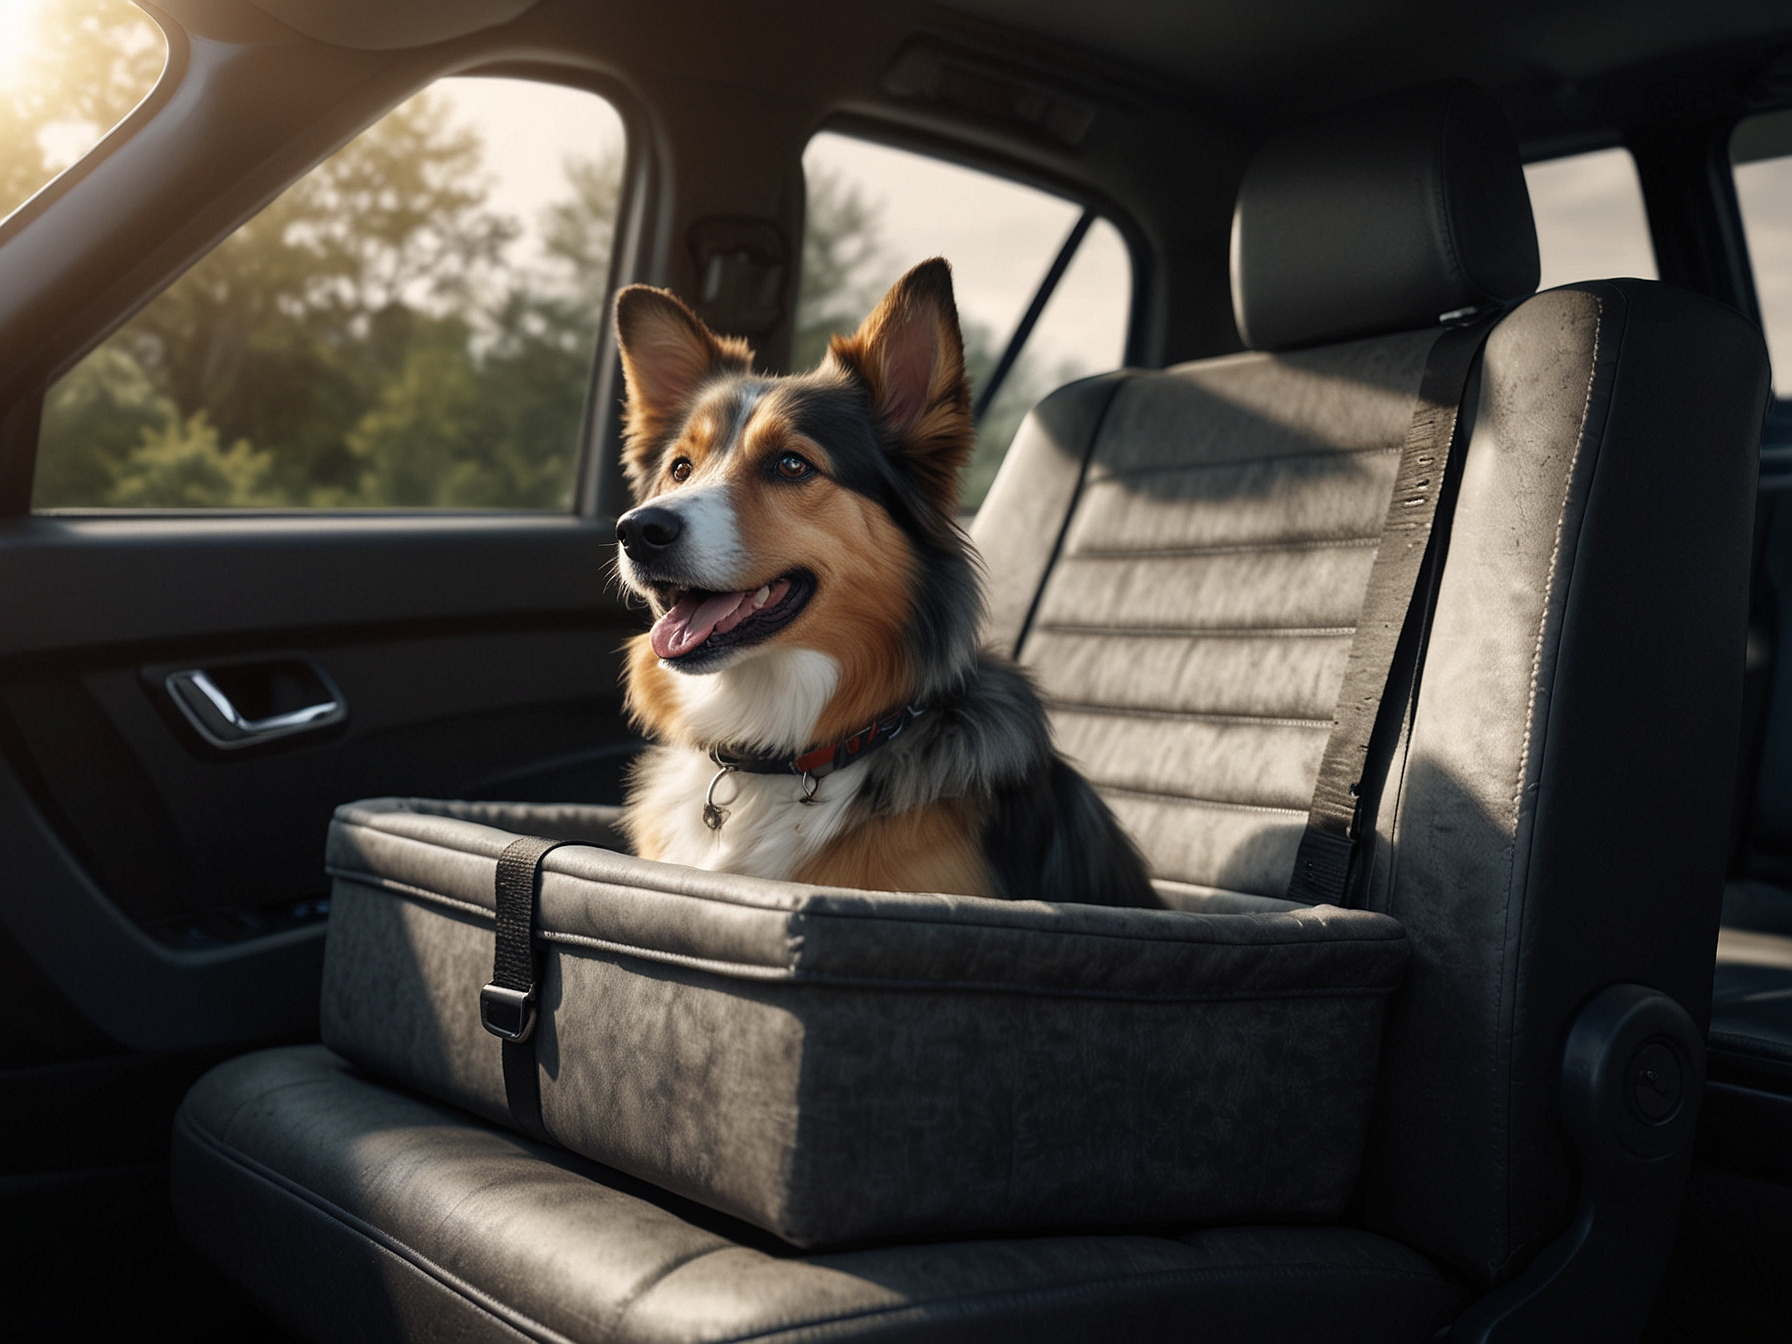 A happy dog sitting in a pet booster seat in the back of a car, looking out the window, illustrating secure and comfortable travel for pets in vehicles.